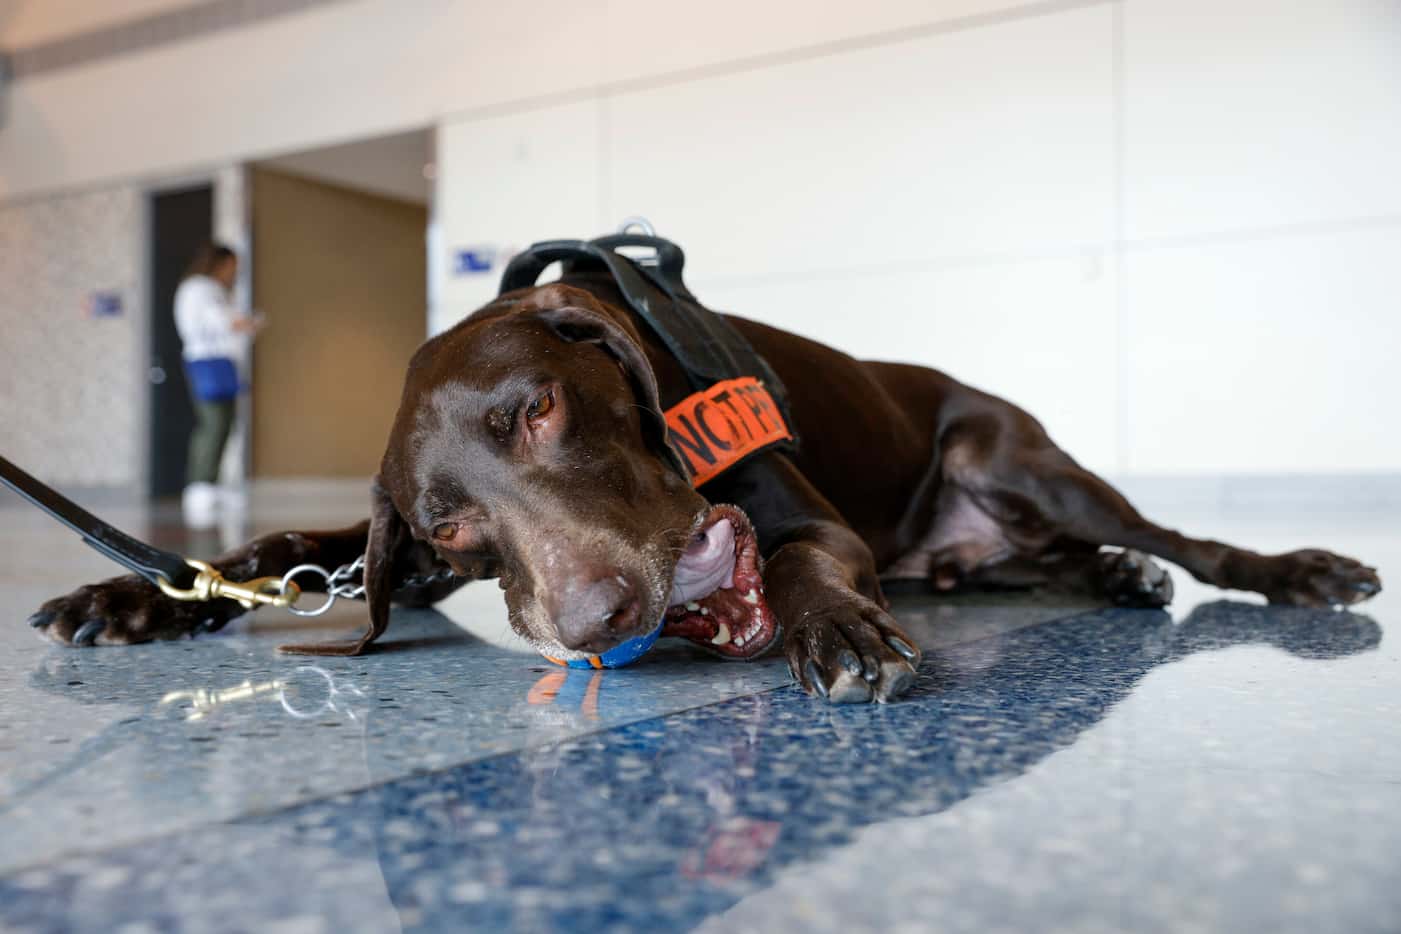 Explosive detection K-9 Dusan, a 7-year-old German shorthaired pointer, chews on his ball...